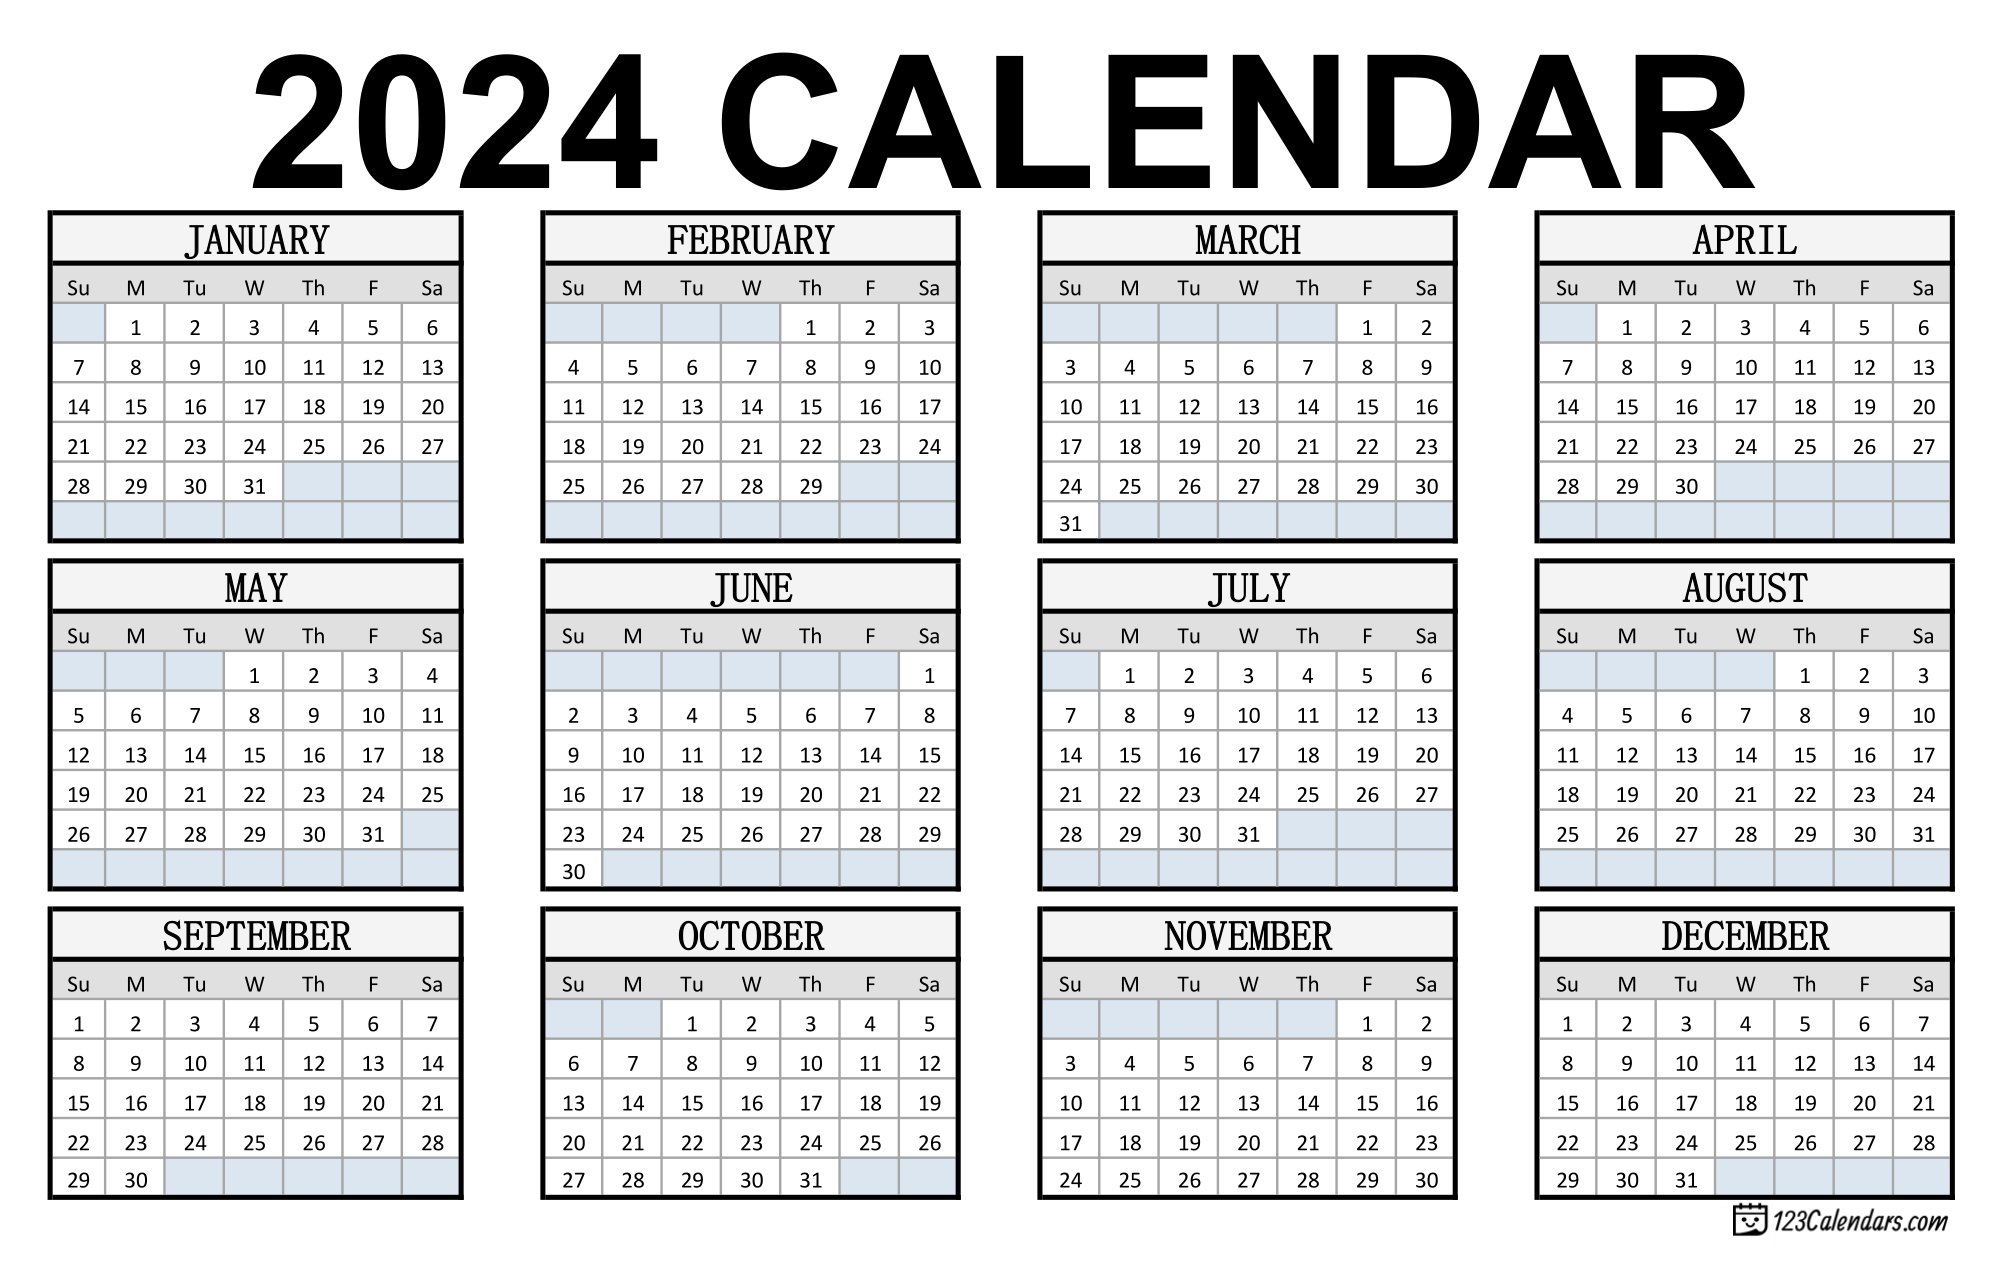 Printable 2024 calendar with important dates and events